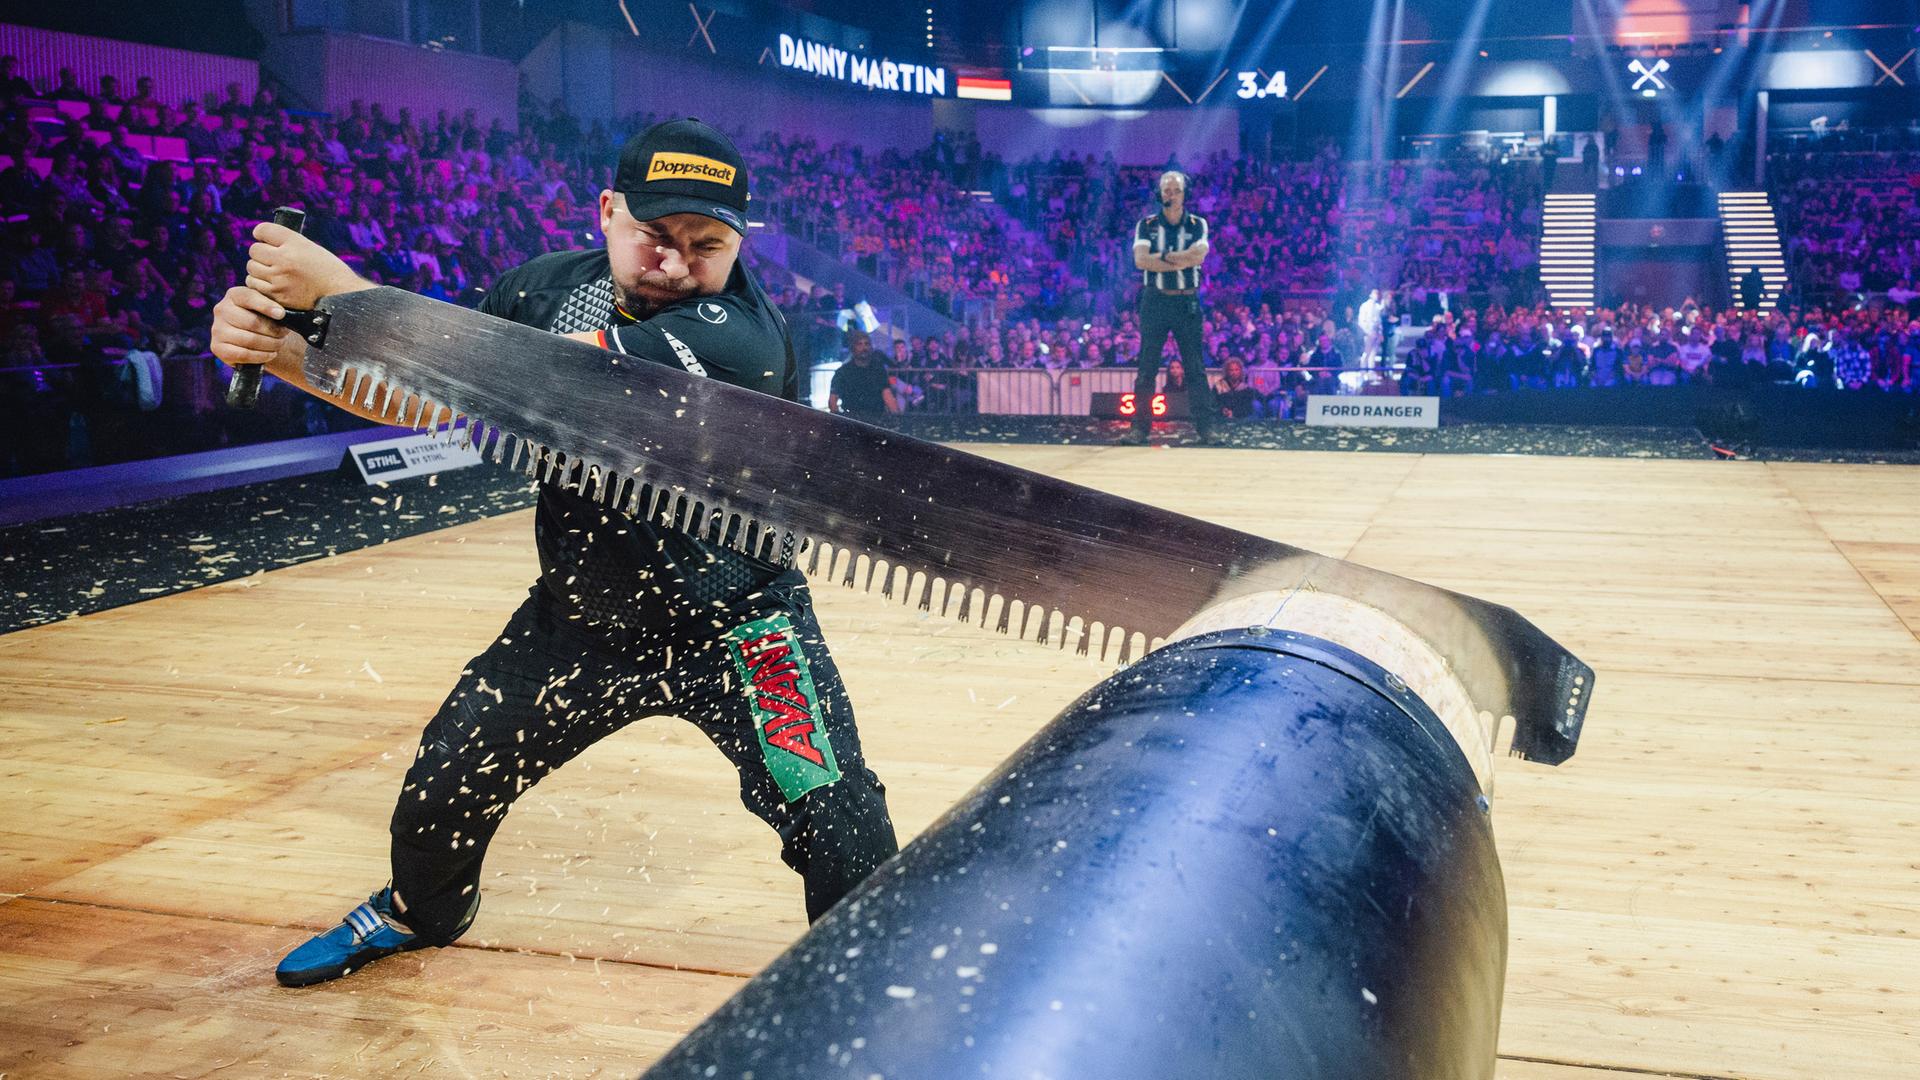 Lumberjack Martin sports with a monster chainsaw to hunt for medals |  hessenschau.de